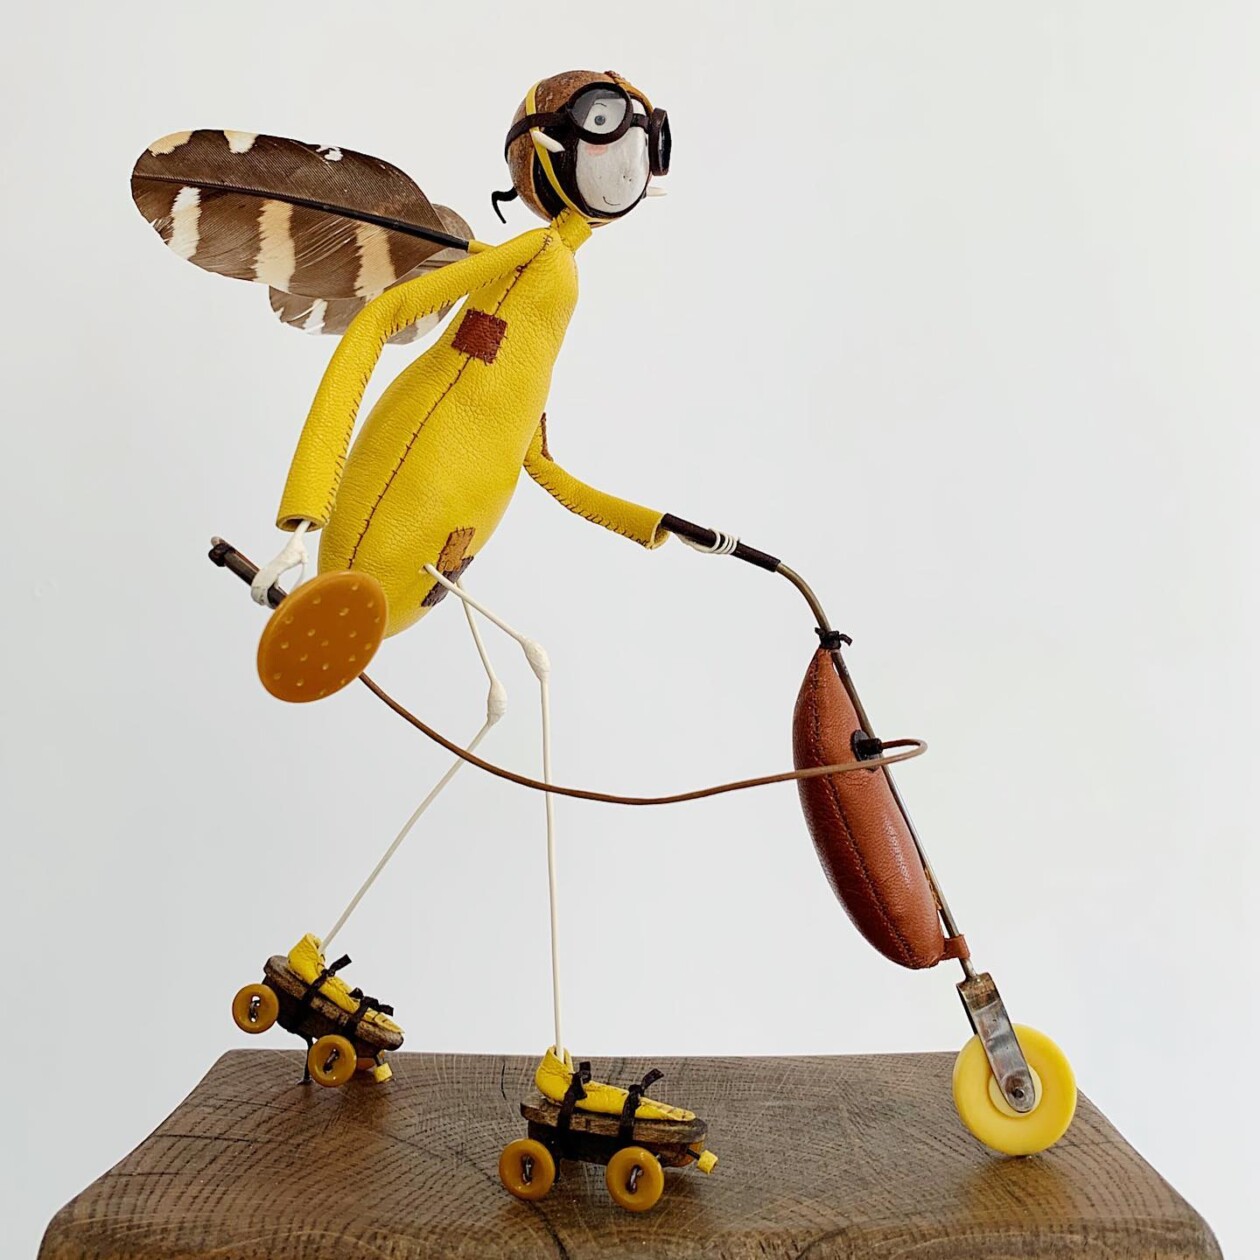 The Quirky And Amusing Fairy Lady Sculptures Of Samantha Bryan (11)